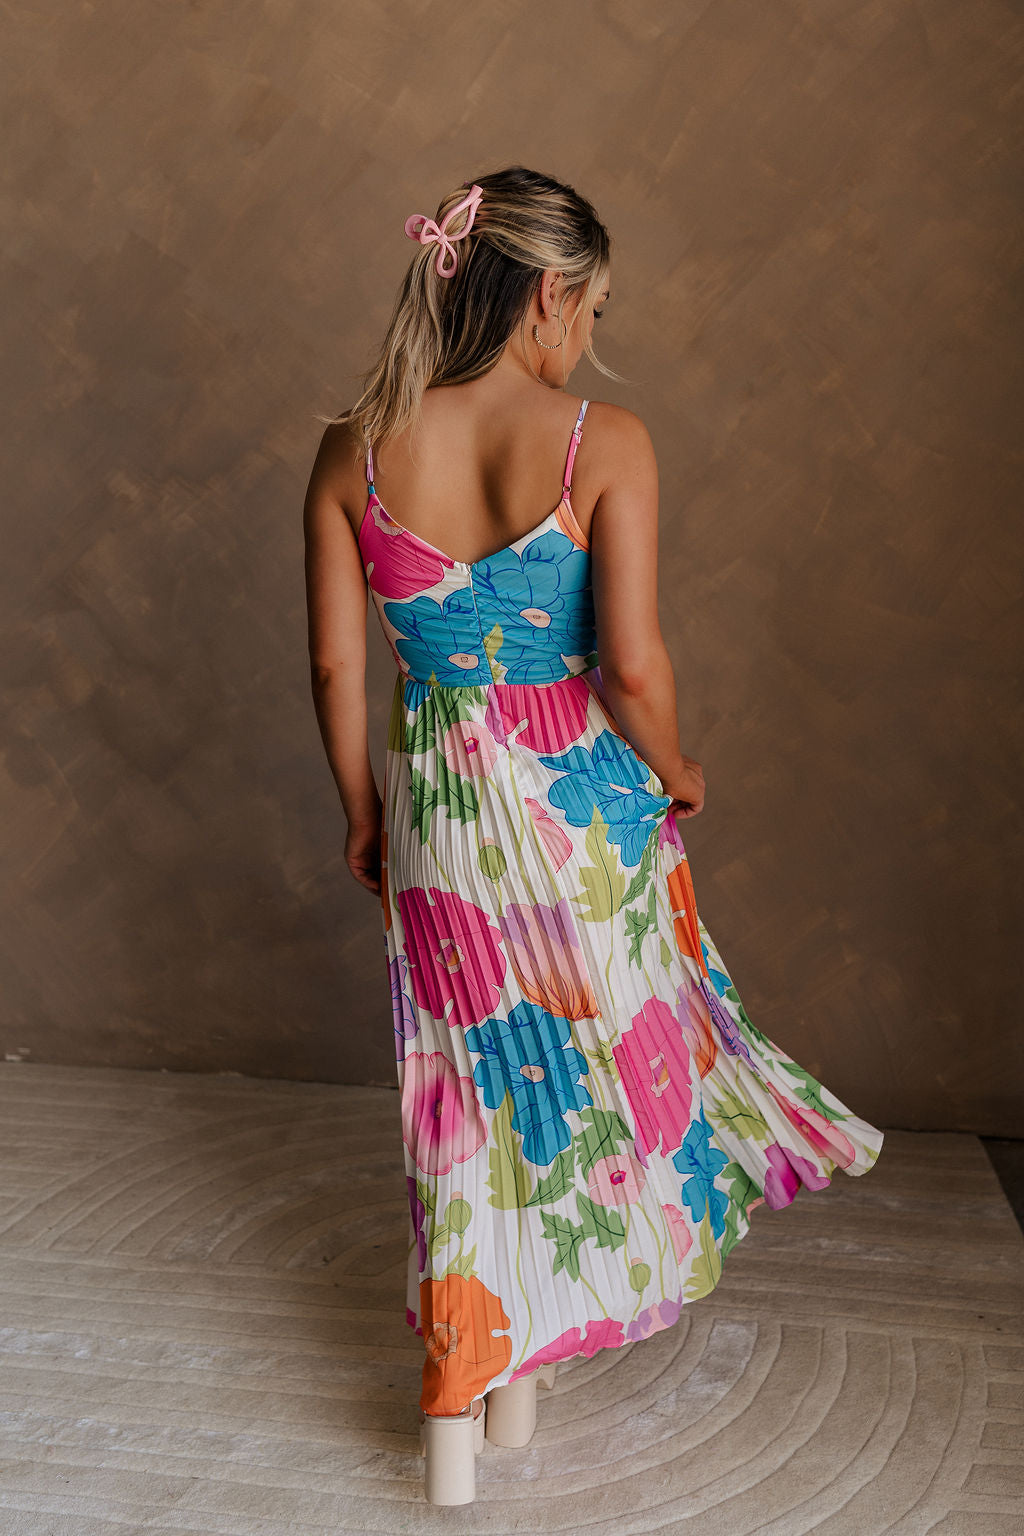 Full body back view of model wearing the Alia Pleated Floral Maxi Dress that has multi-colored fabric with a floral print, pleating, thin straps, and a sweetheart neck. Model is holding skirt.